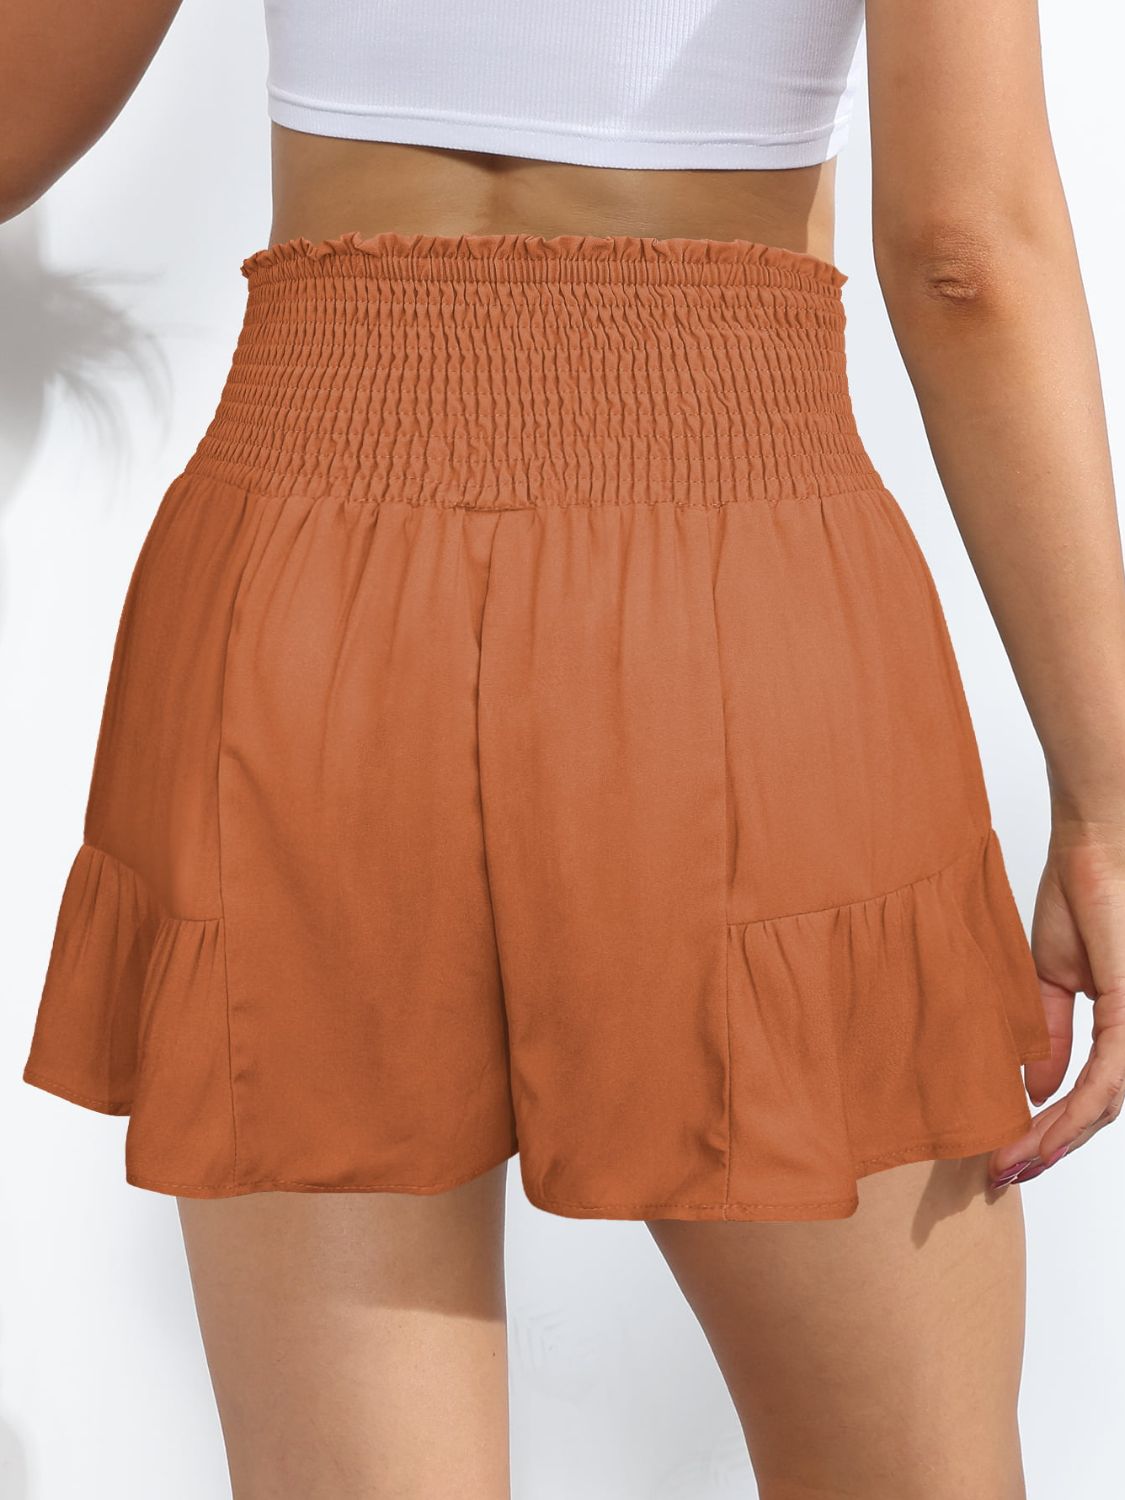 Smocked Tie-Front High-Rise Shorts - Women’s Clothing & Accessories - Shorts - 6 - 2024